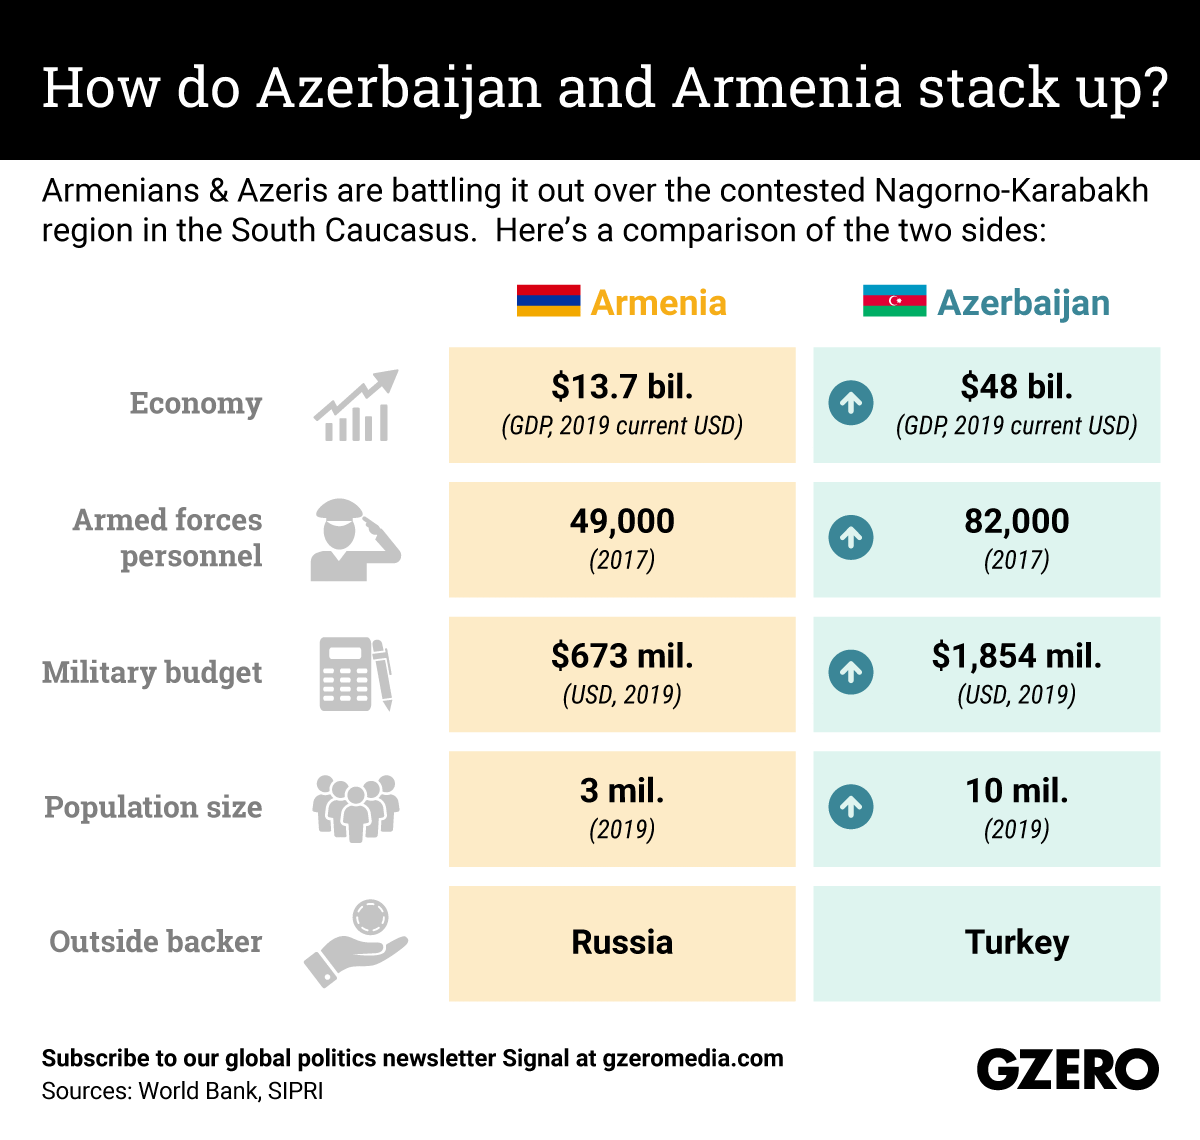 The Graphic Truth: How do Azerbaijan and Armenia stack up?